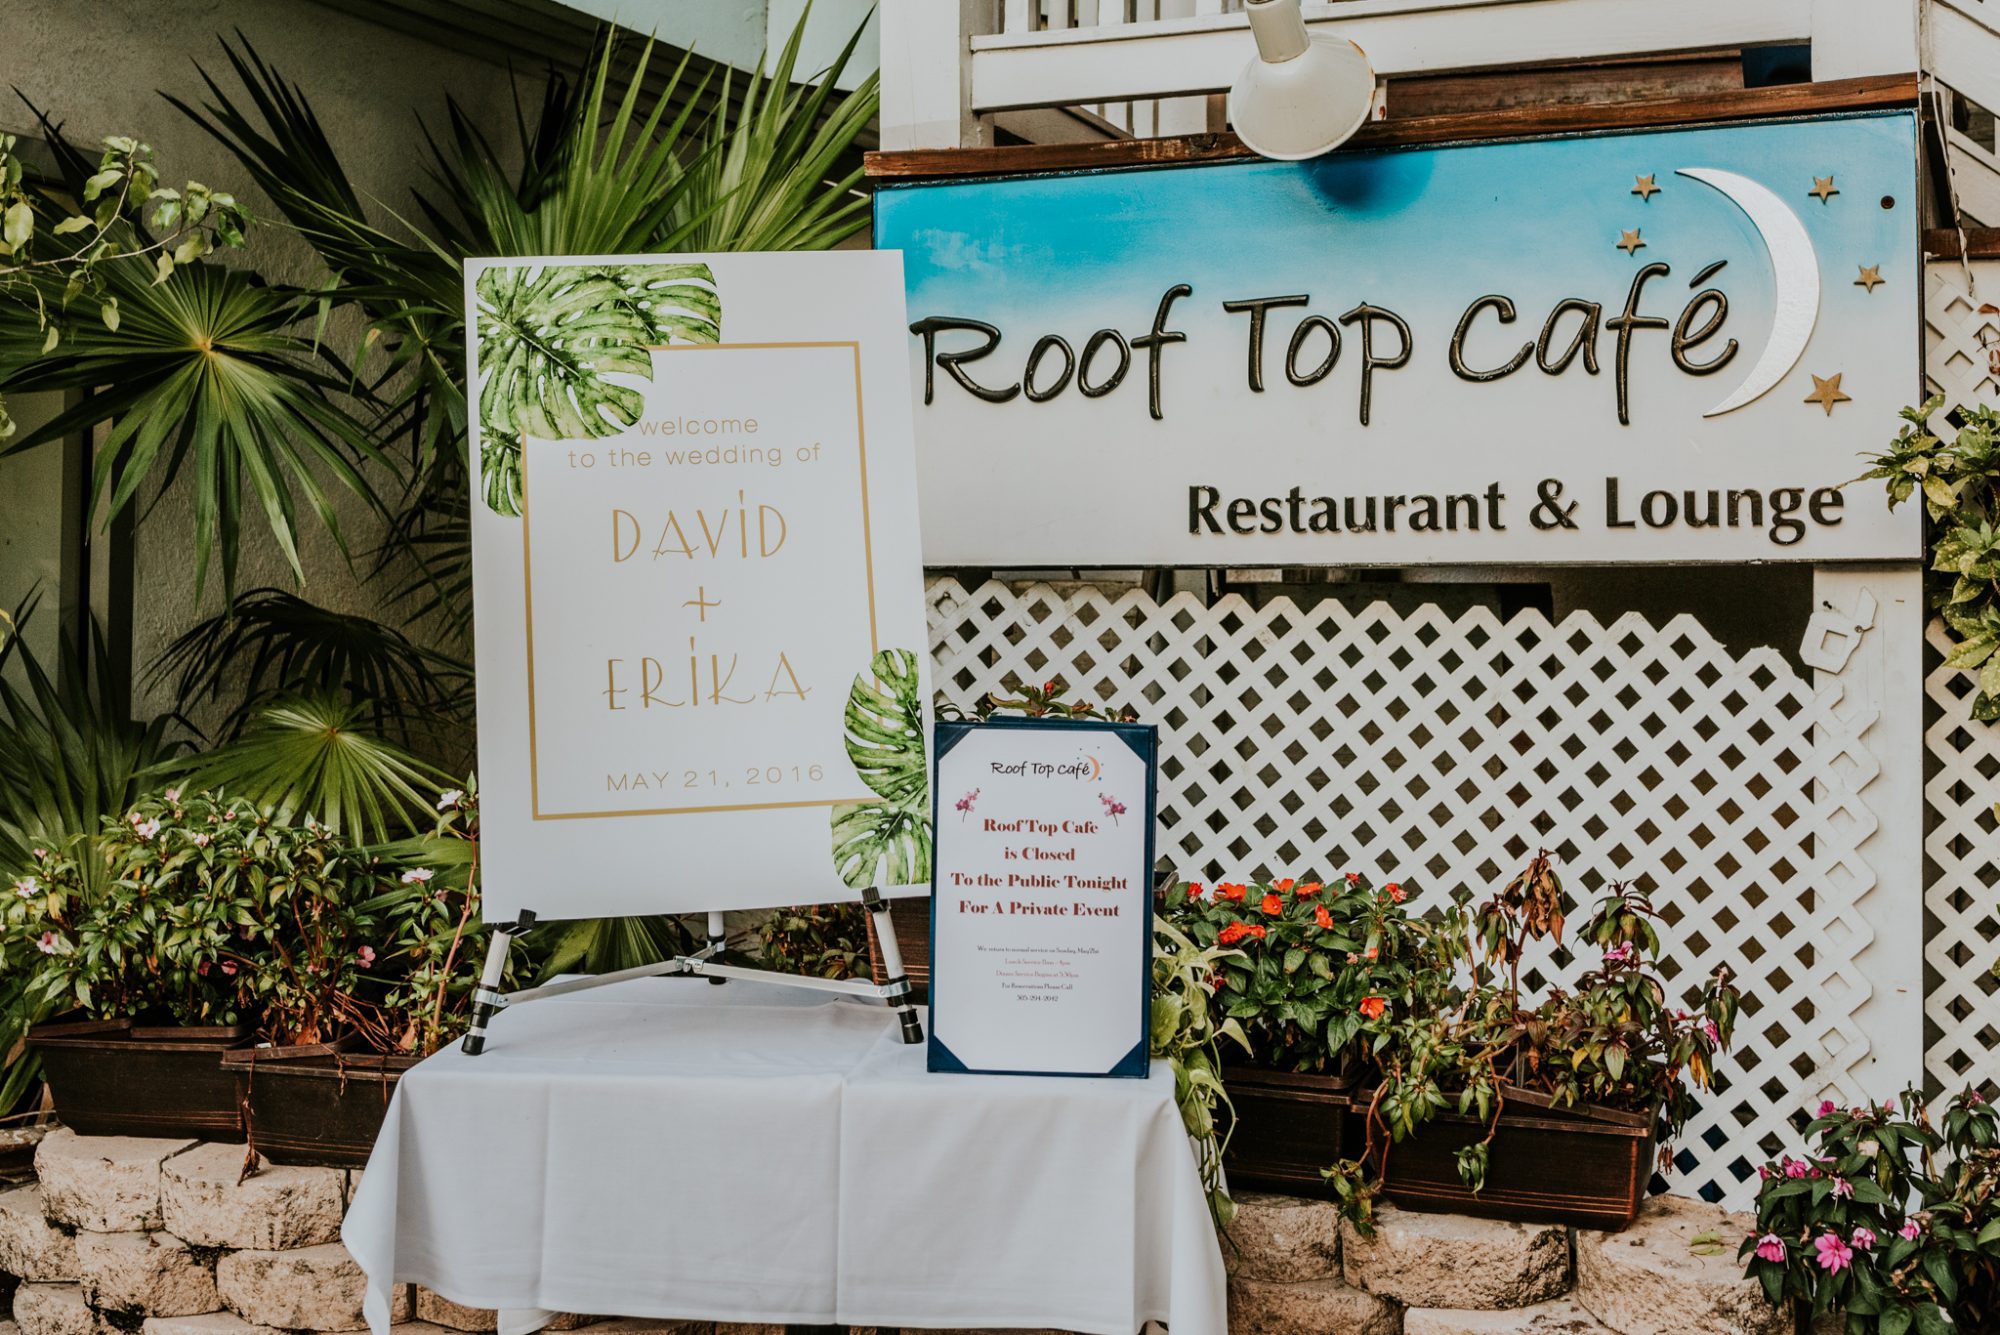 A rooftop cafe and lounge sign, captured by Erika & David - Key West Wedding Photographer.